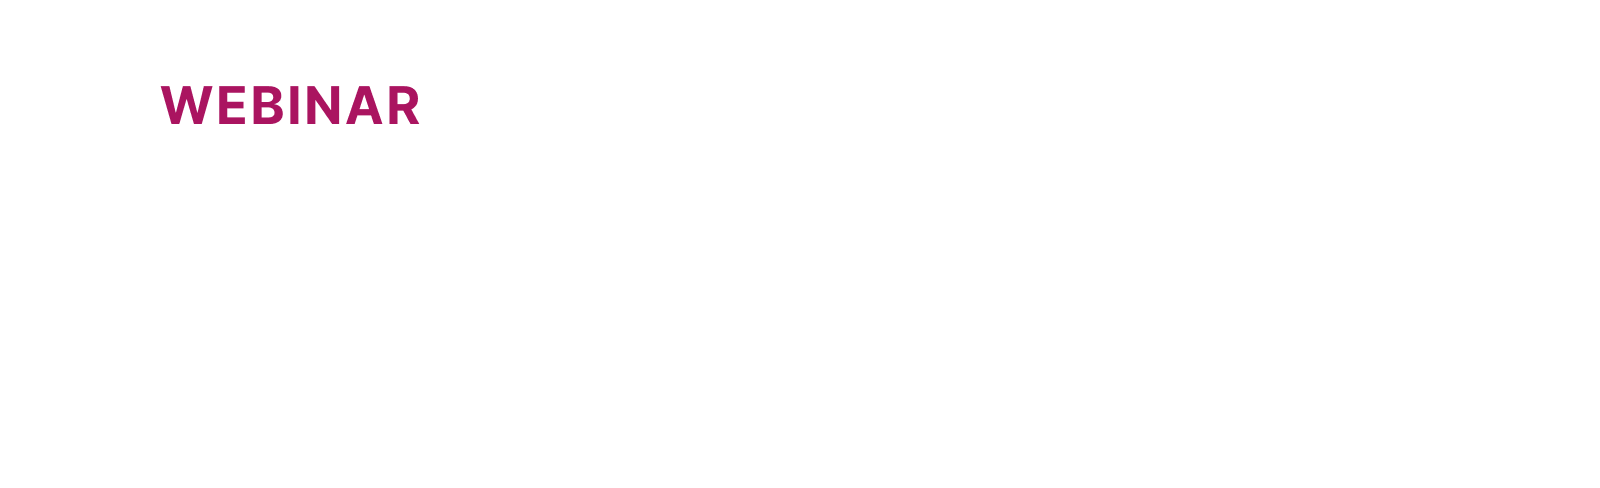 Creative Video Ideas for Business